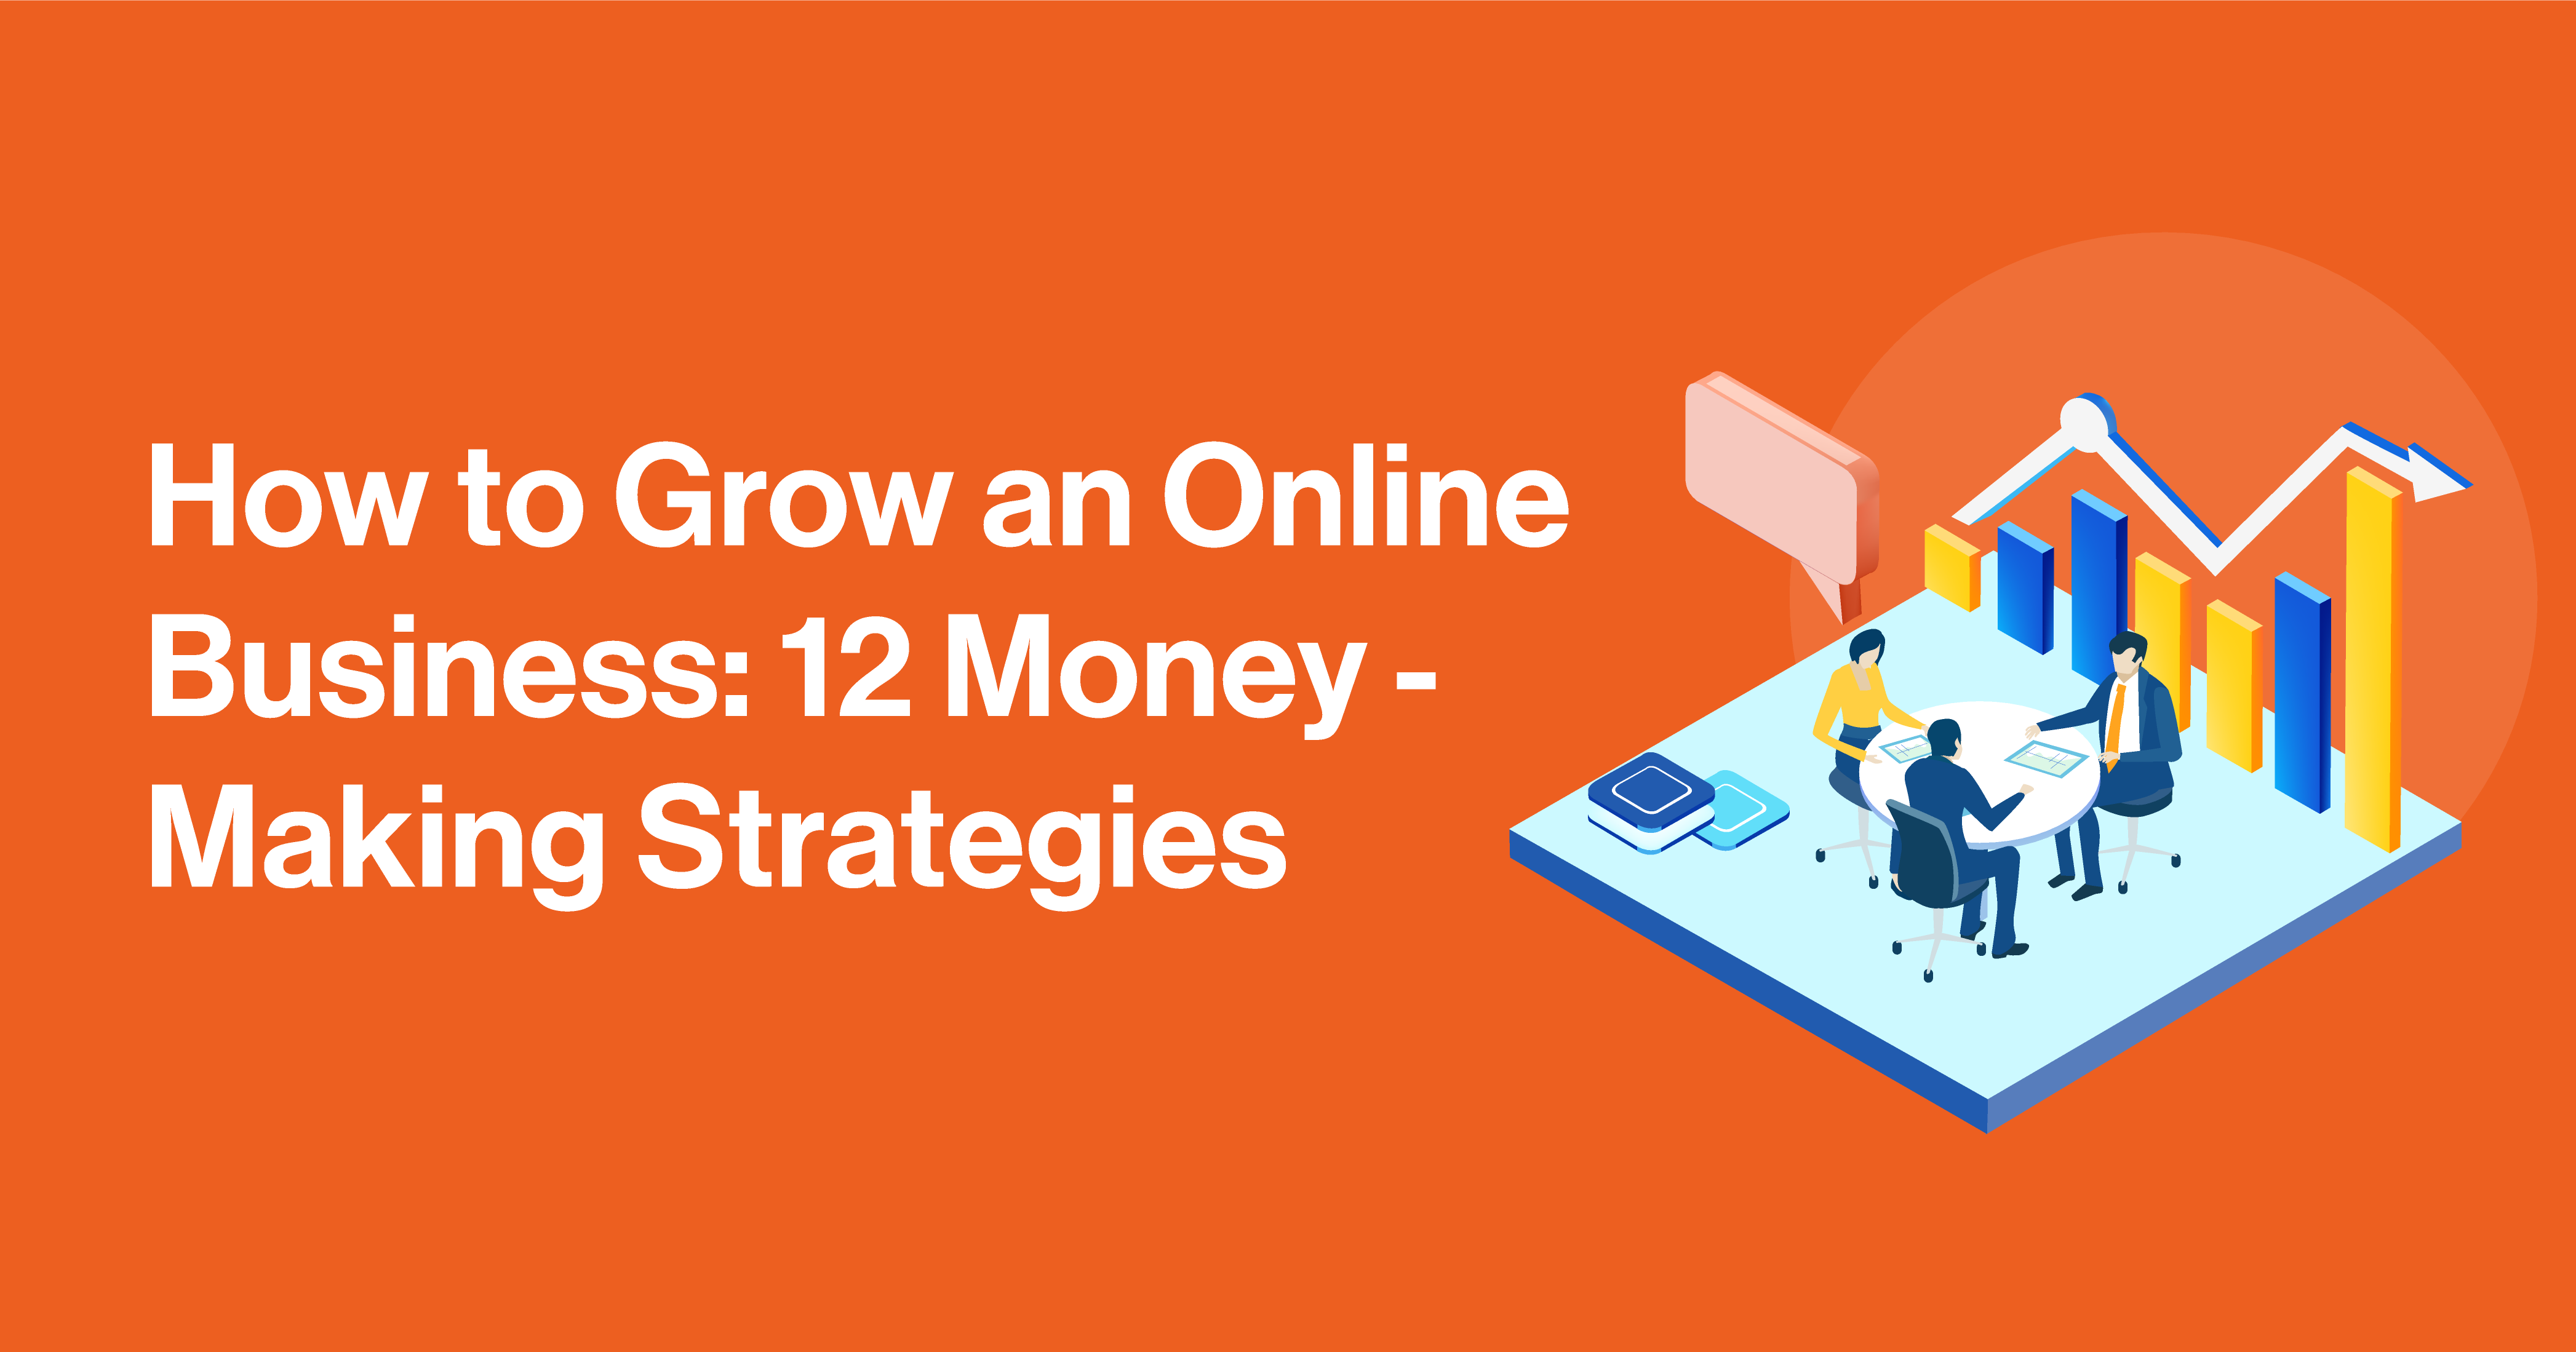 How to Grow an Online Business: 12 Money-Making Strategies - Yieldify